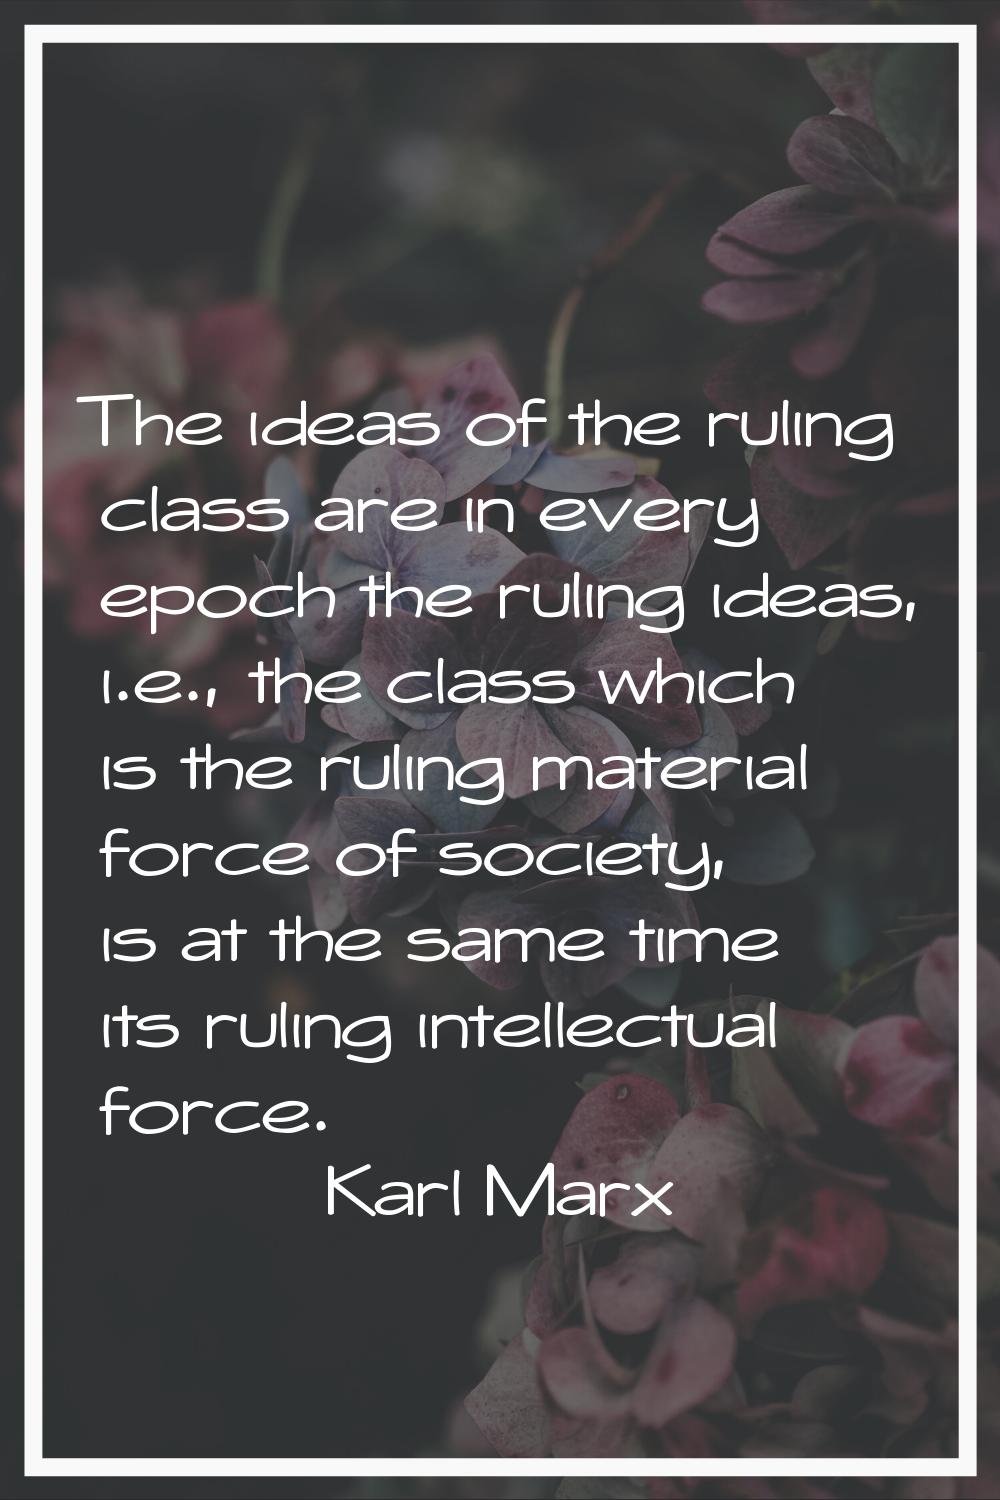 The ideas of the ruling class are in every epoch the ruling ideas, i.e., the class which is the rul